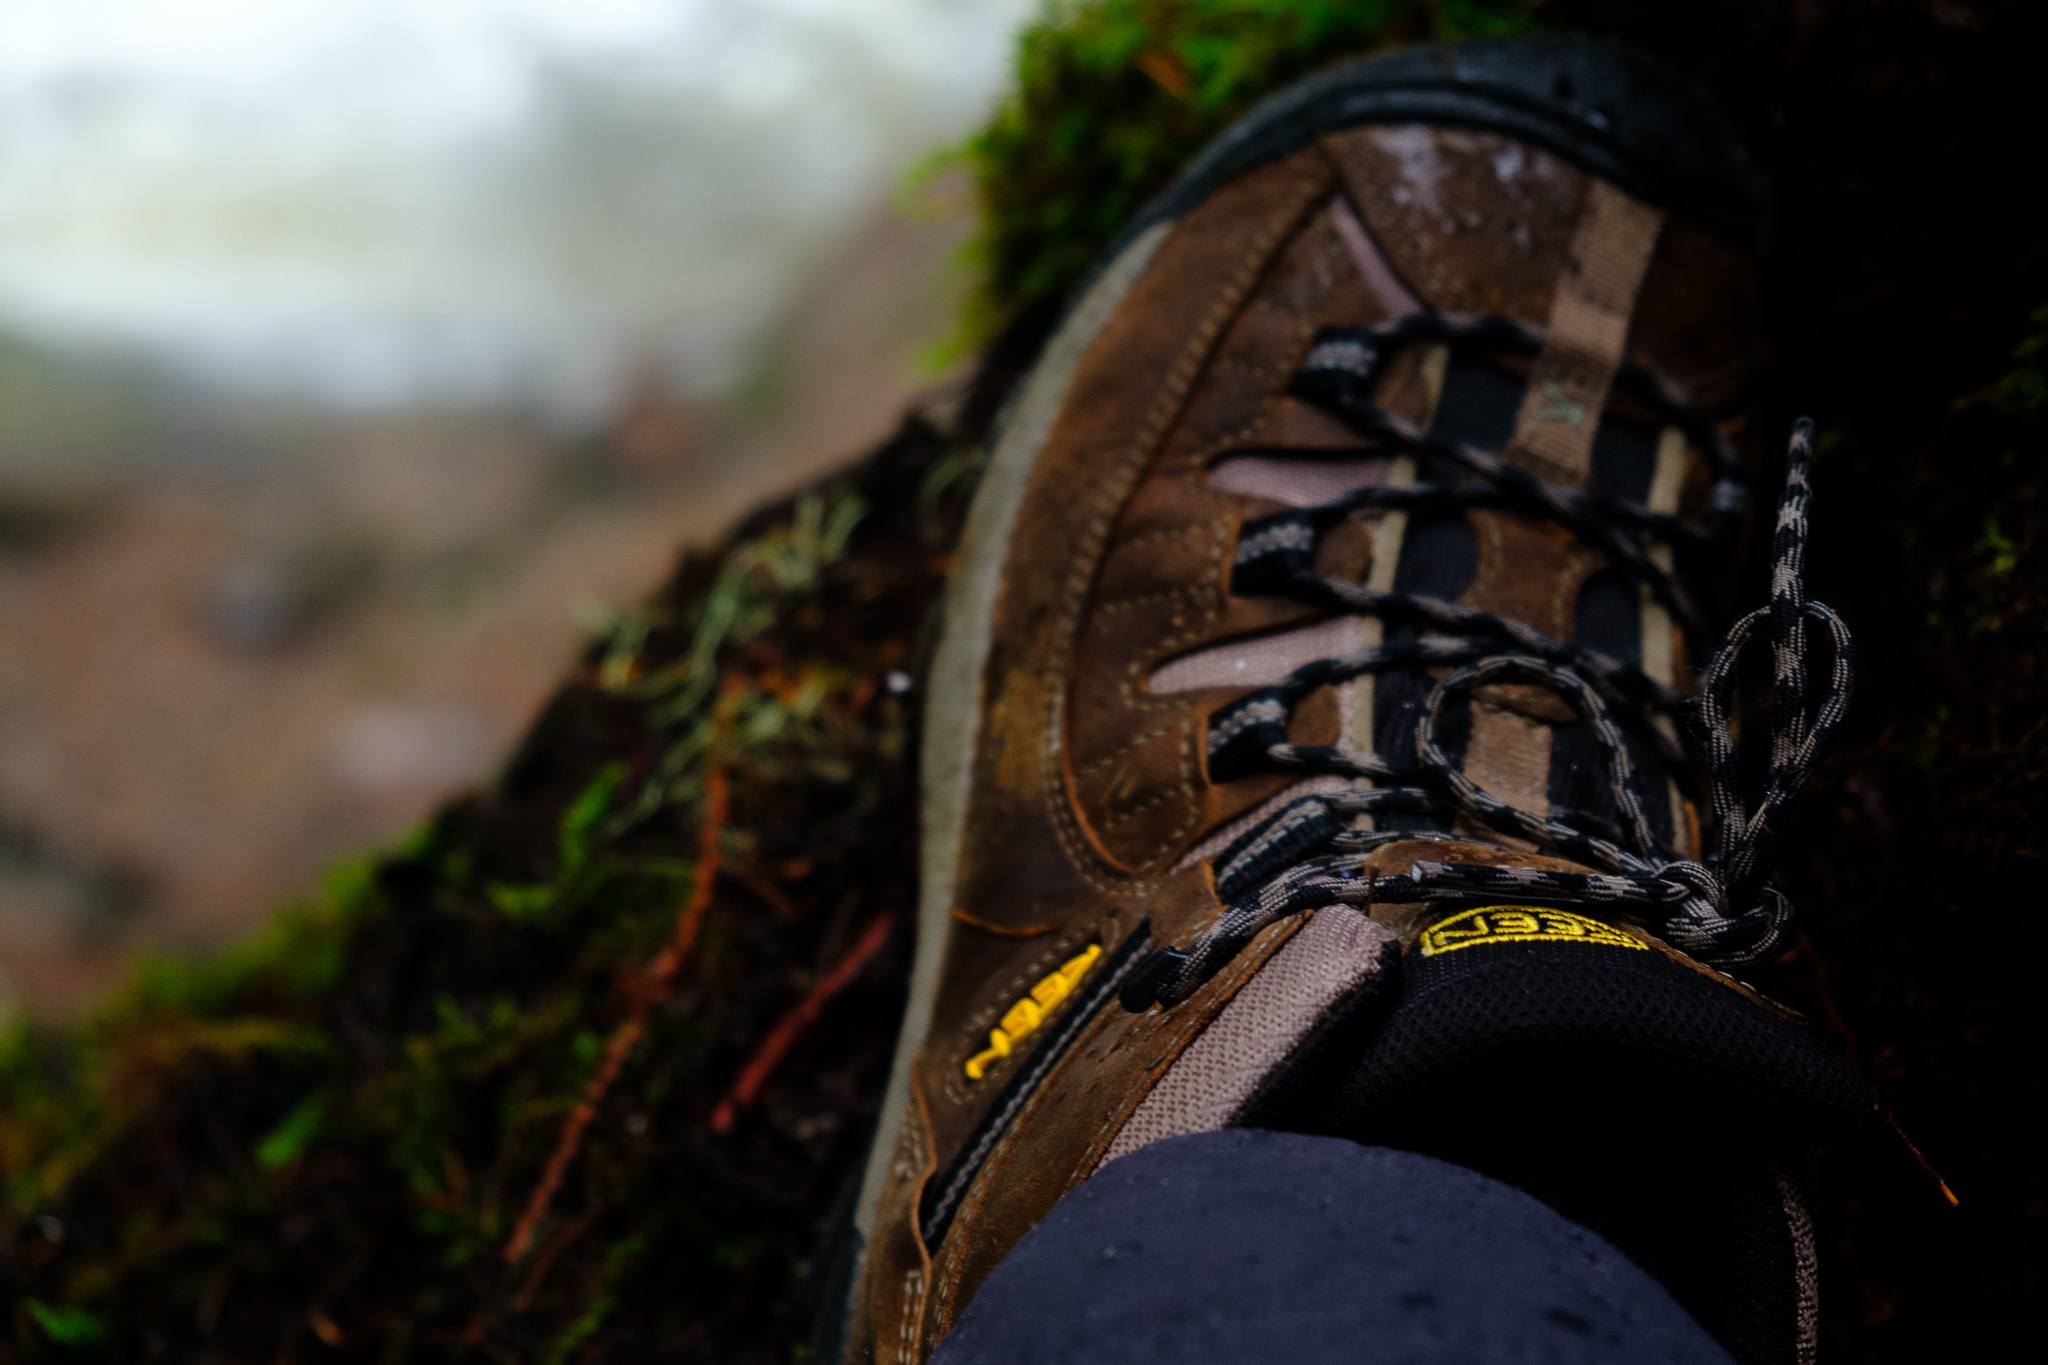 keen hiking boots review